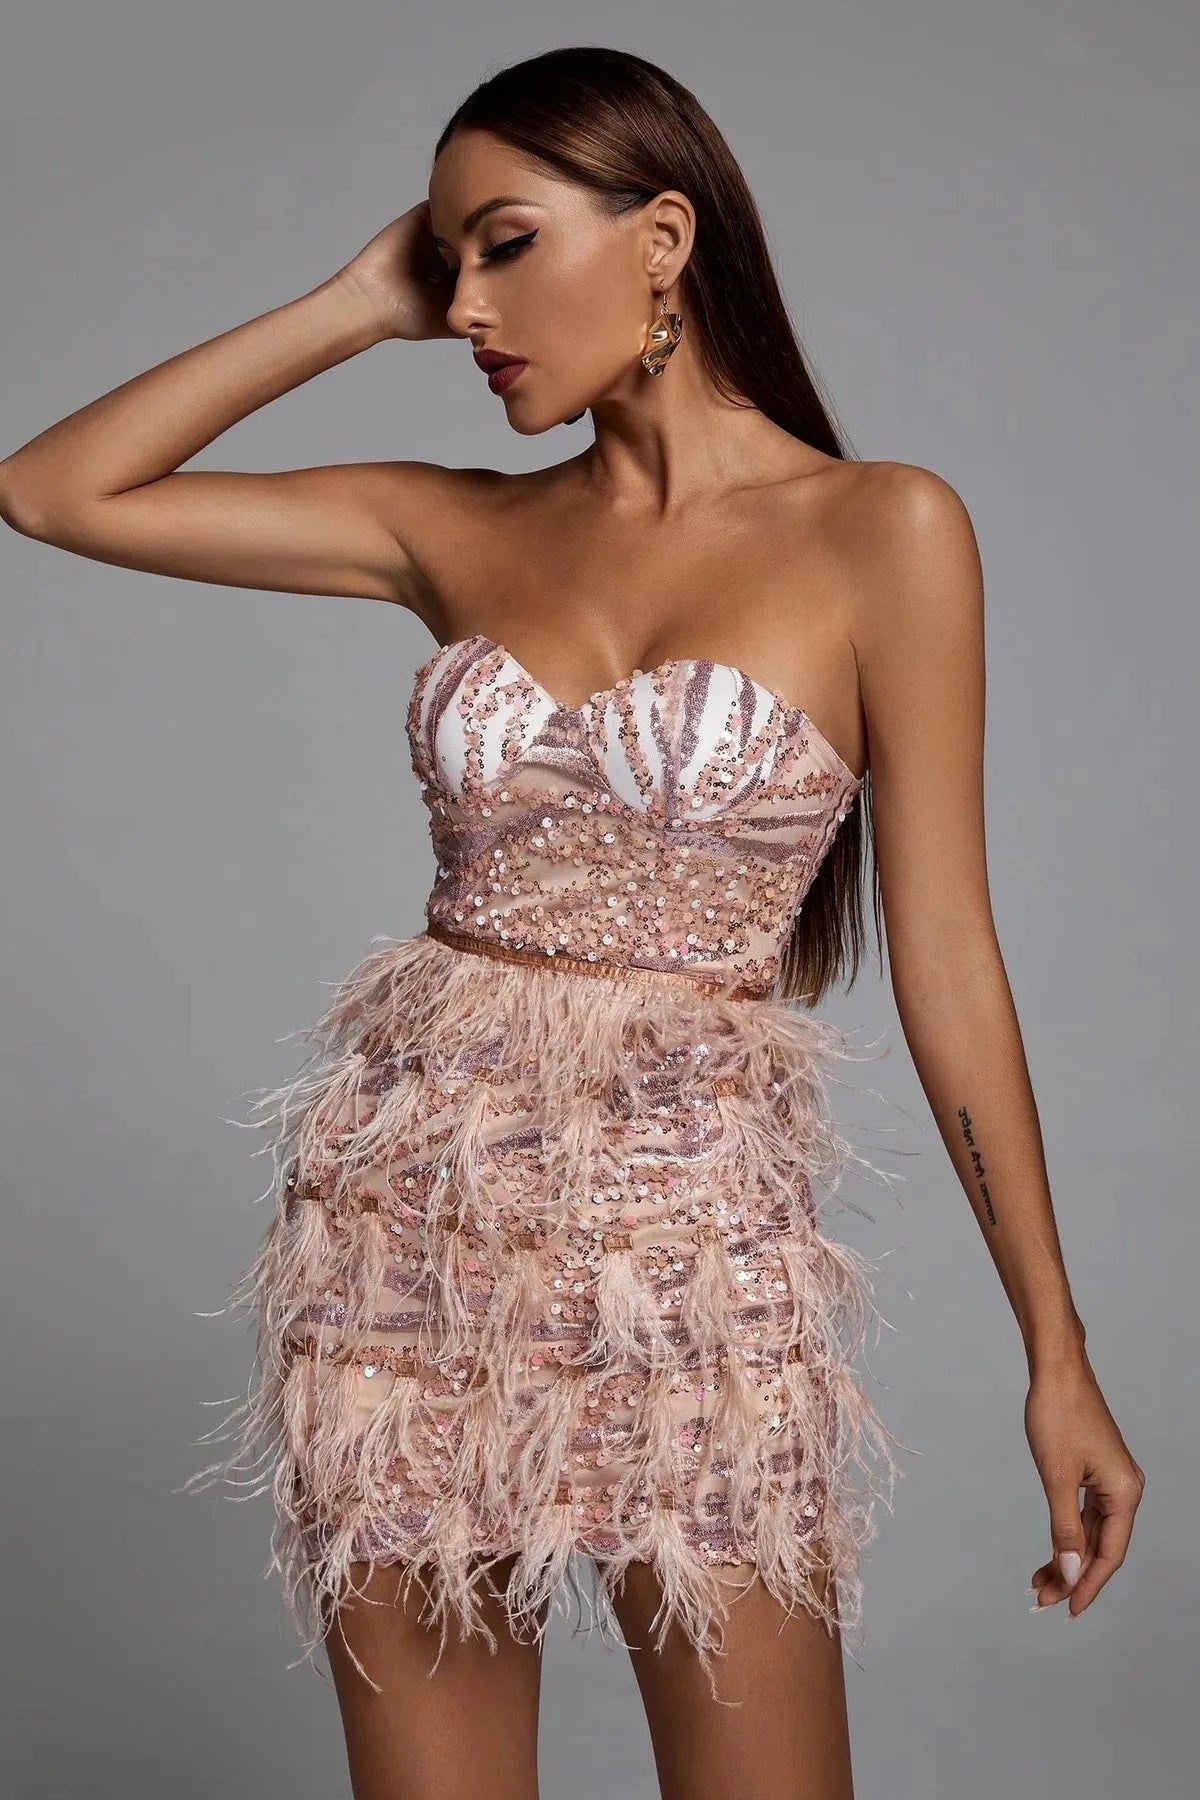 High Quality Pink Sequin Feather Mini Dress Fashion Strapless Night Club Party Bodycon Dress Vestidos